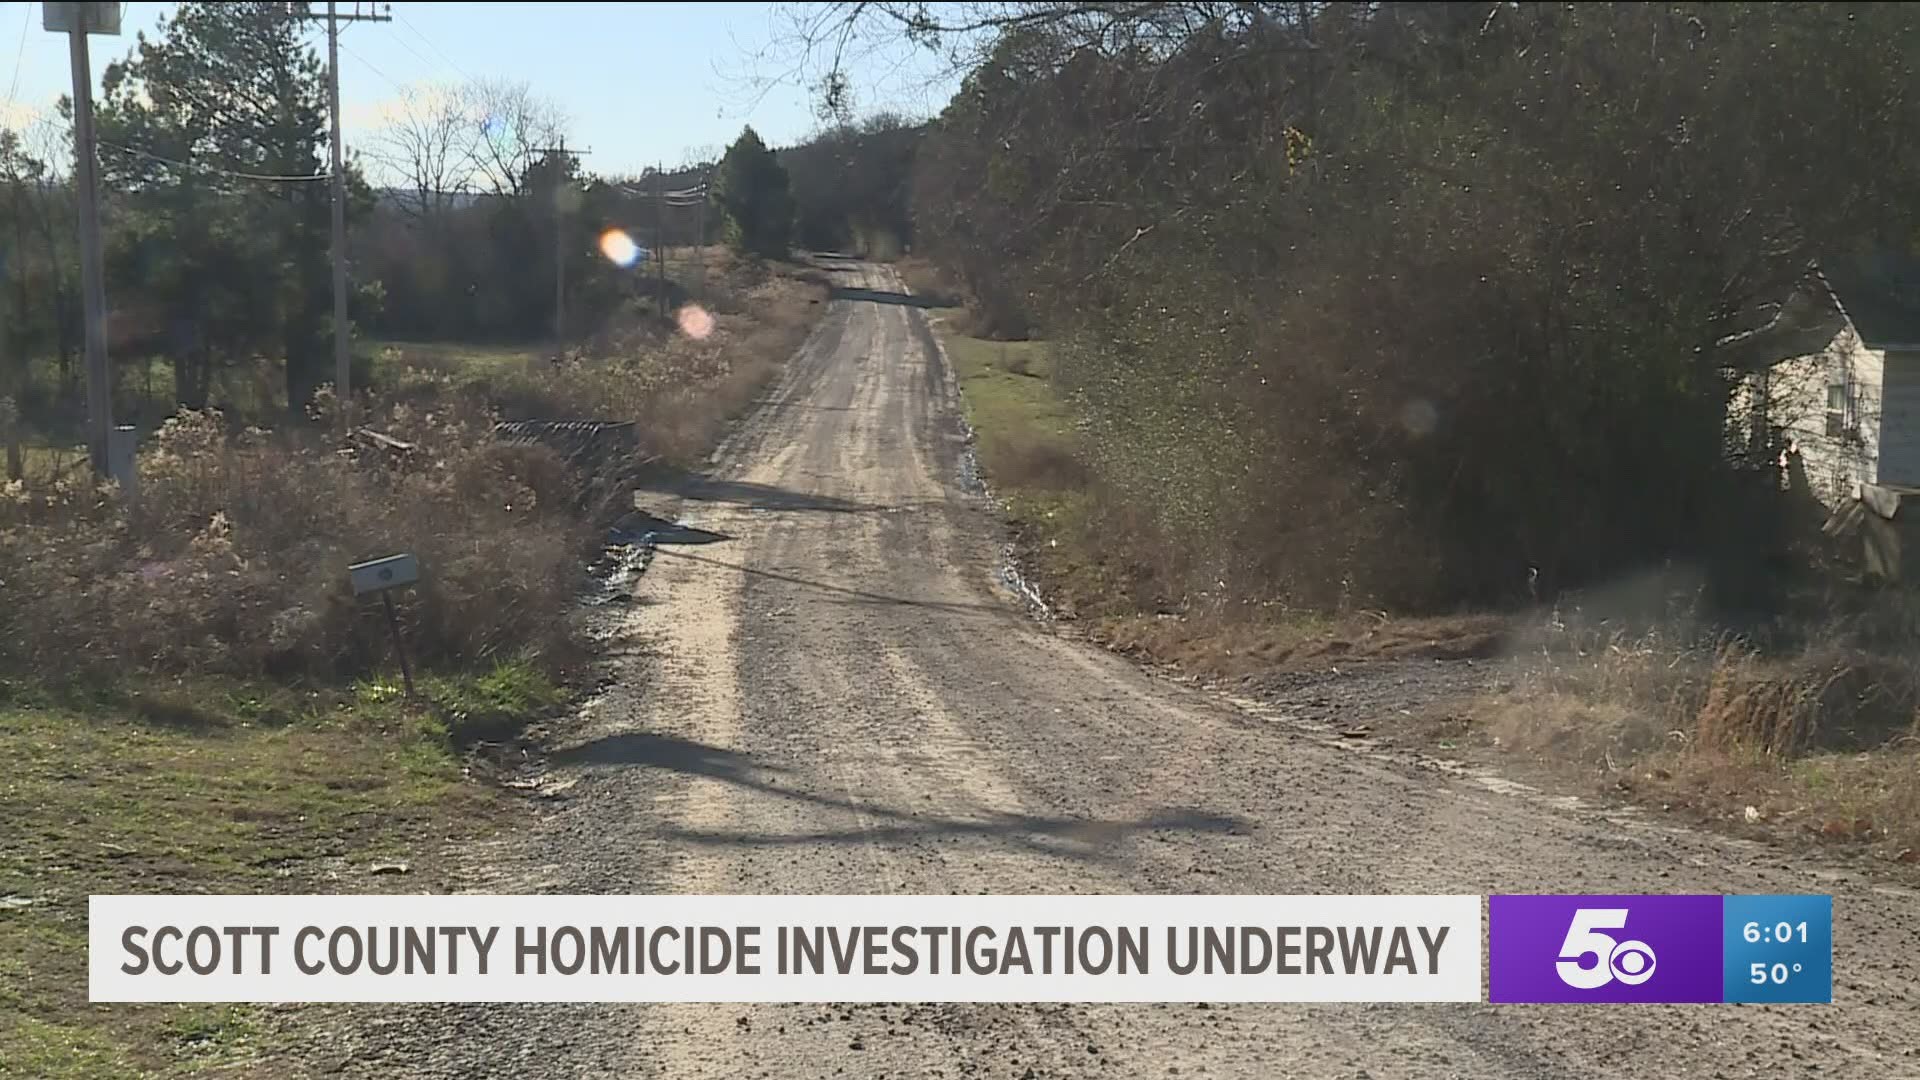 A homicide investigation is underway in Scott County after a woman was found dead inside of a pickup truck on Saturday (Jan. 23). https://bit.ly/3pmM2sv